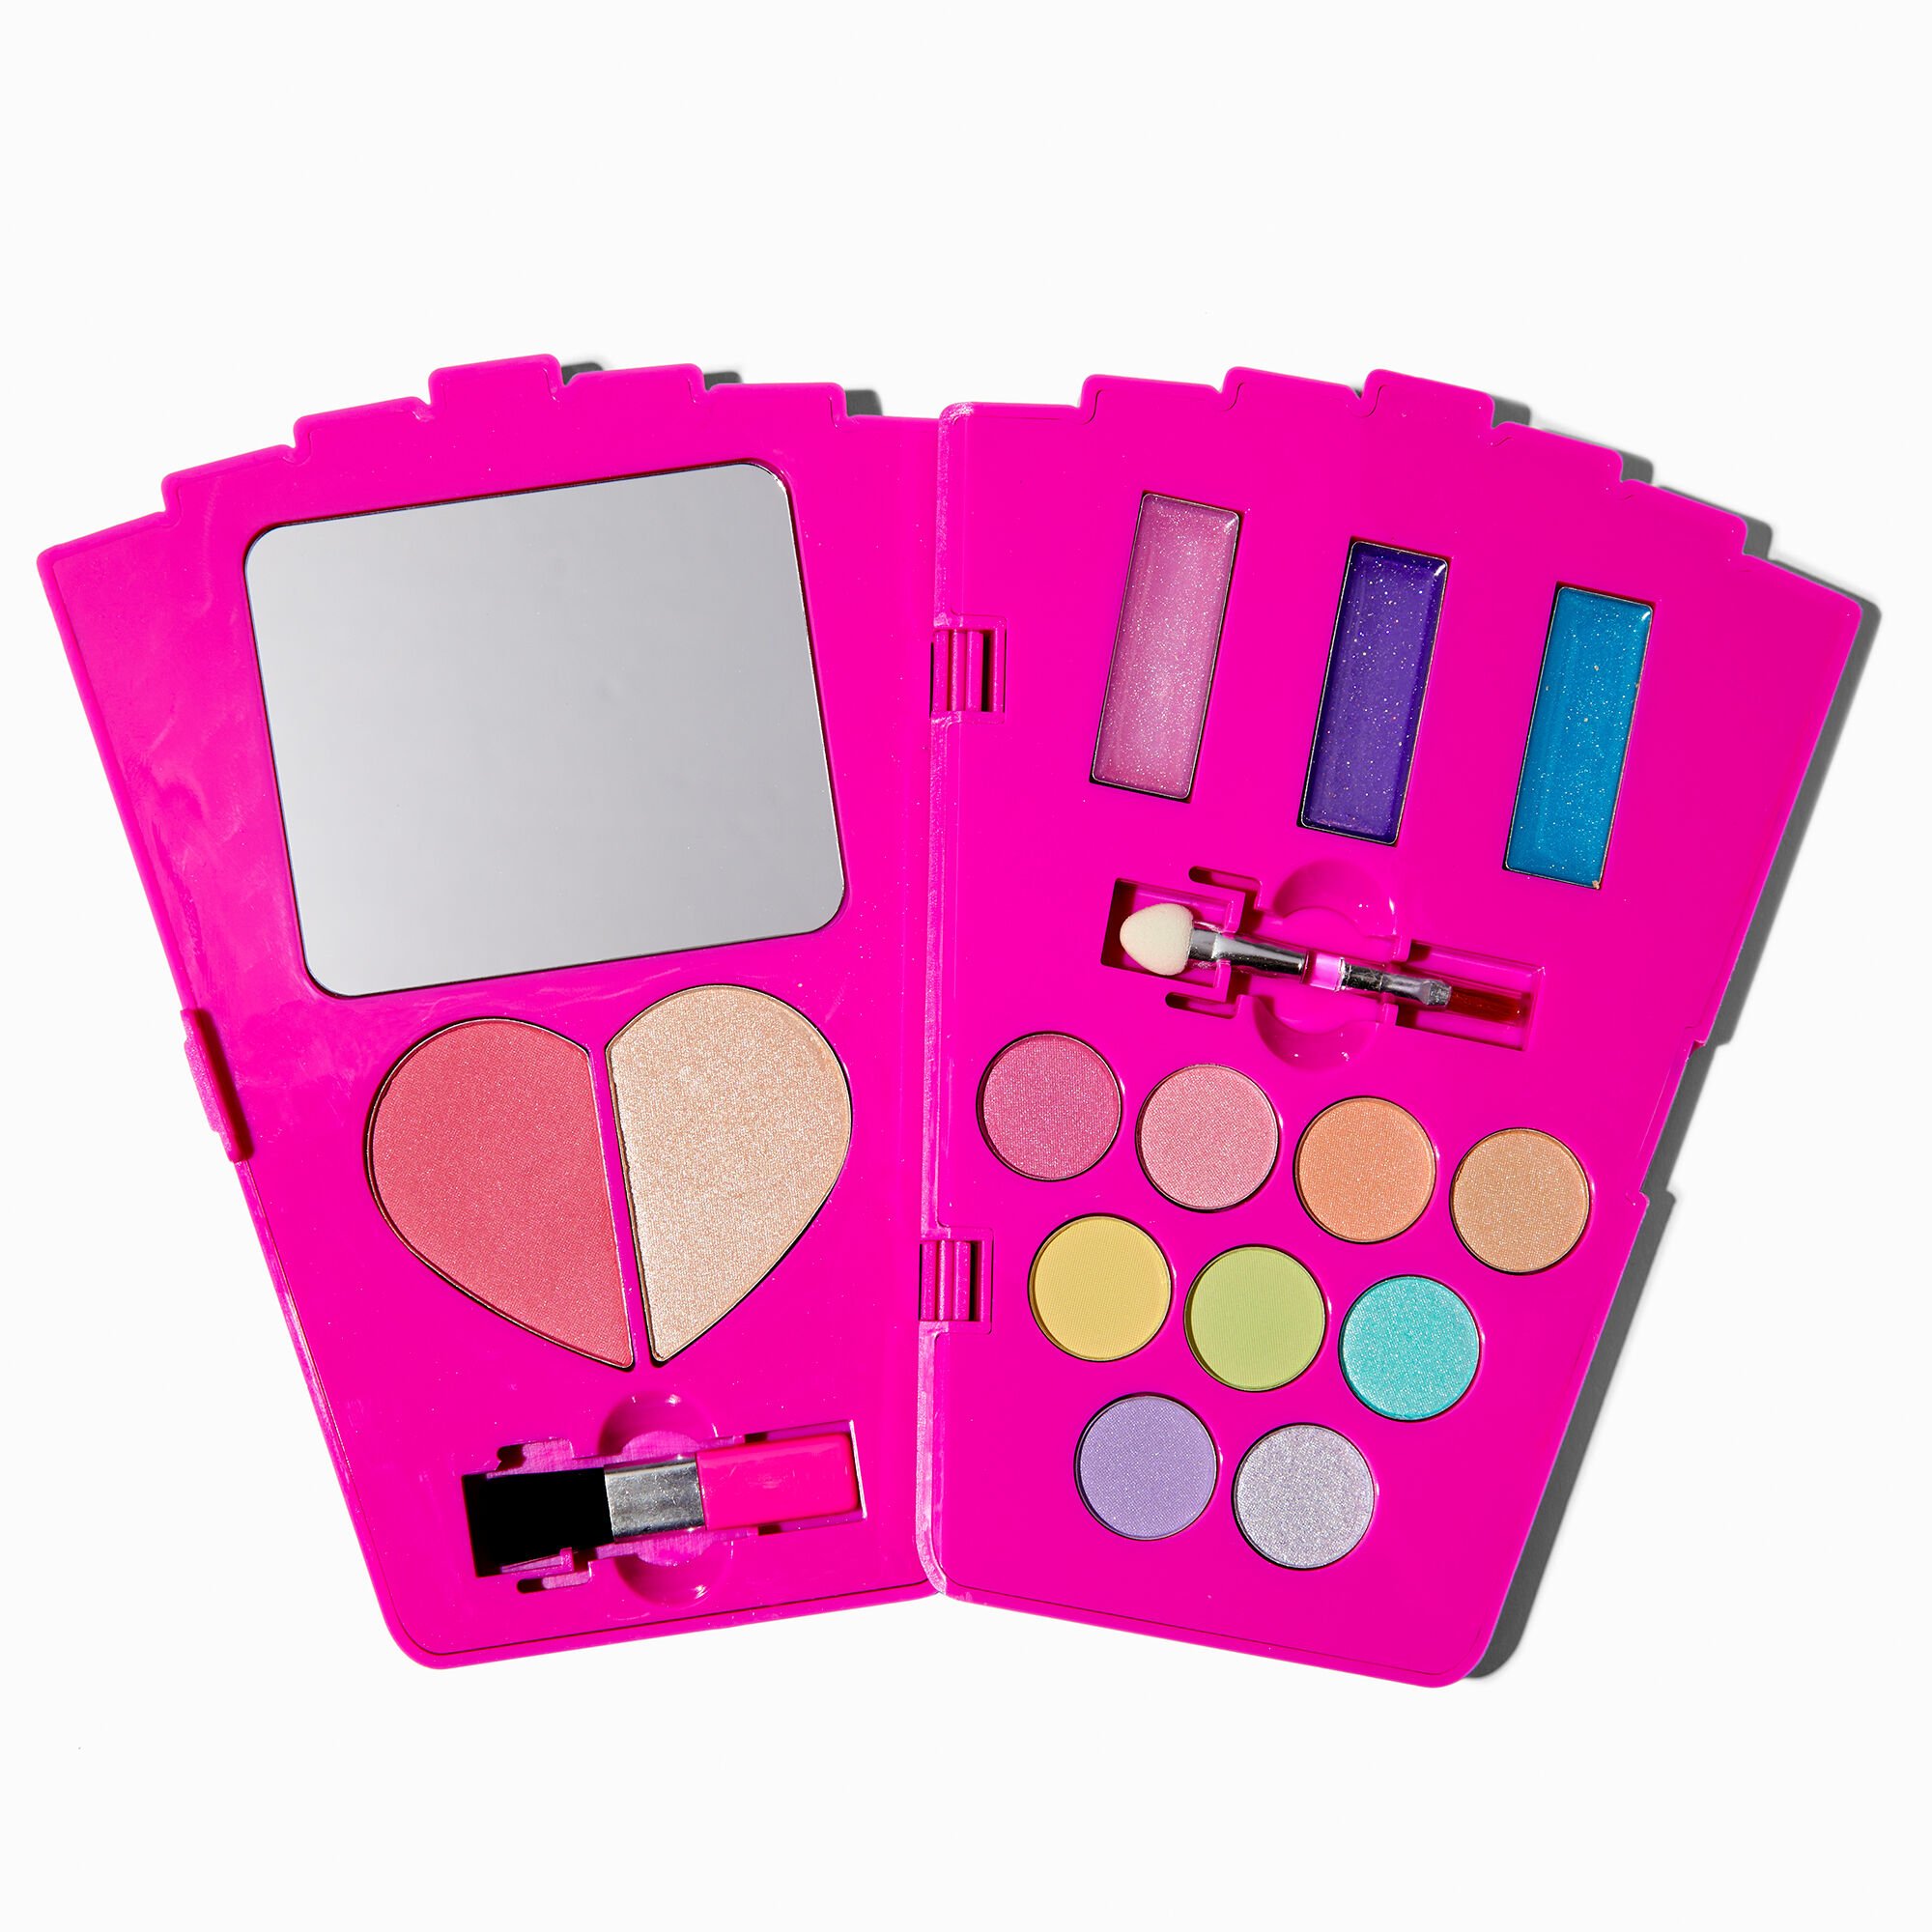 View Claires Bling French Fries Vanilla Scented Makeup Palette information